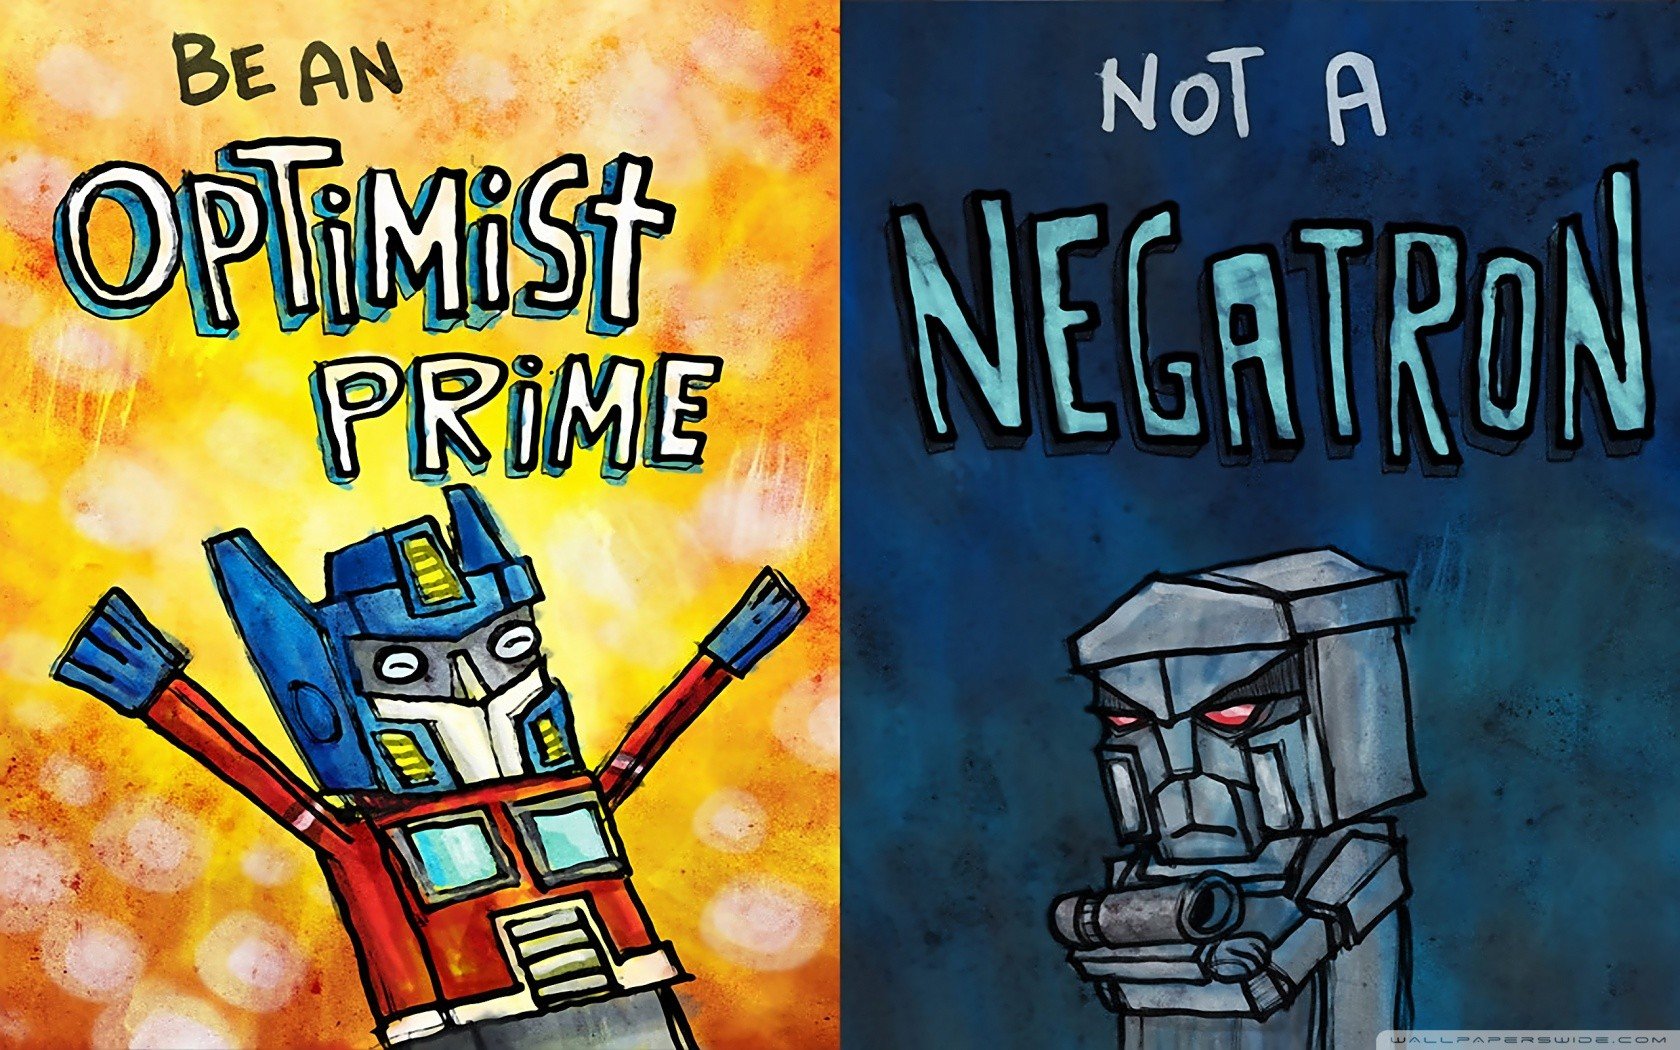 I Need Some Oh My God Who The Fuck Cares Reactions - Optimist Prime Not A Negatron , HD Wallpaper & Backgrounds